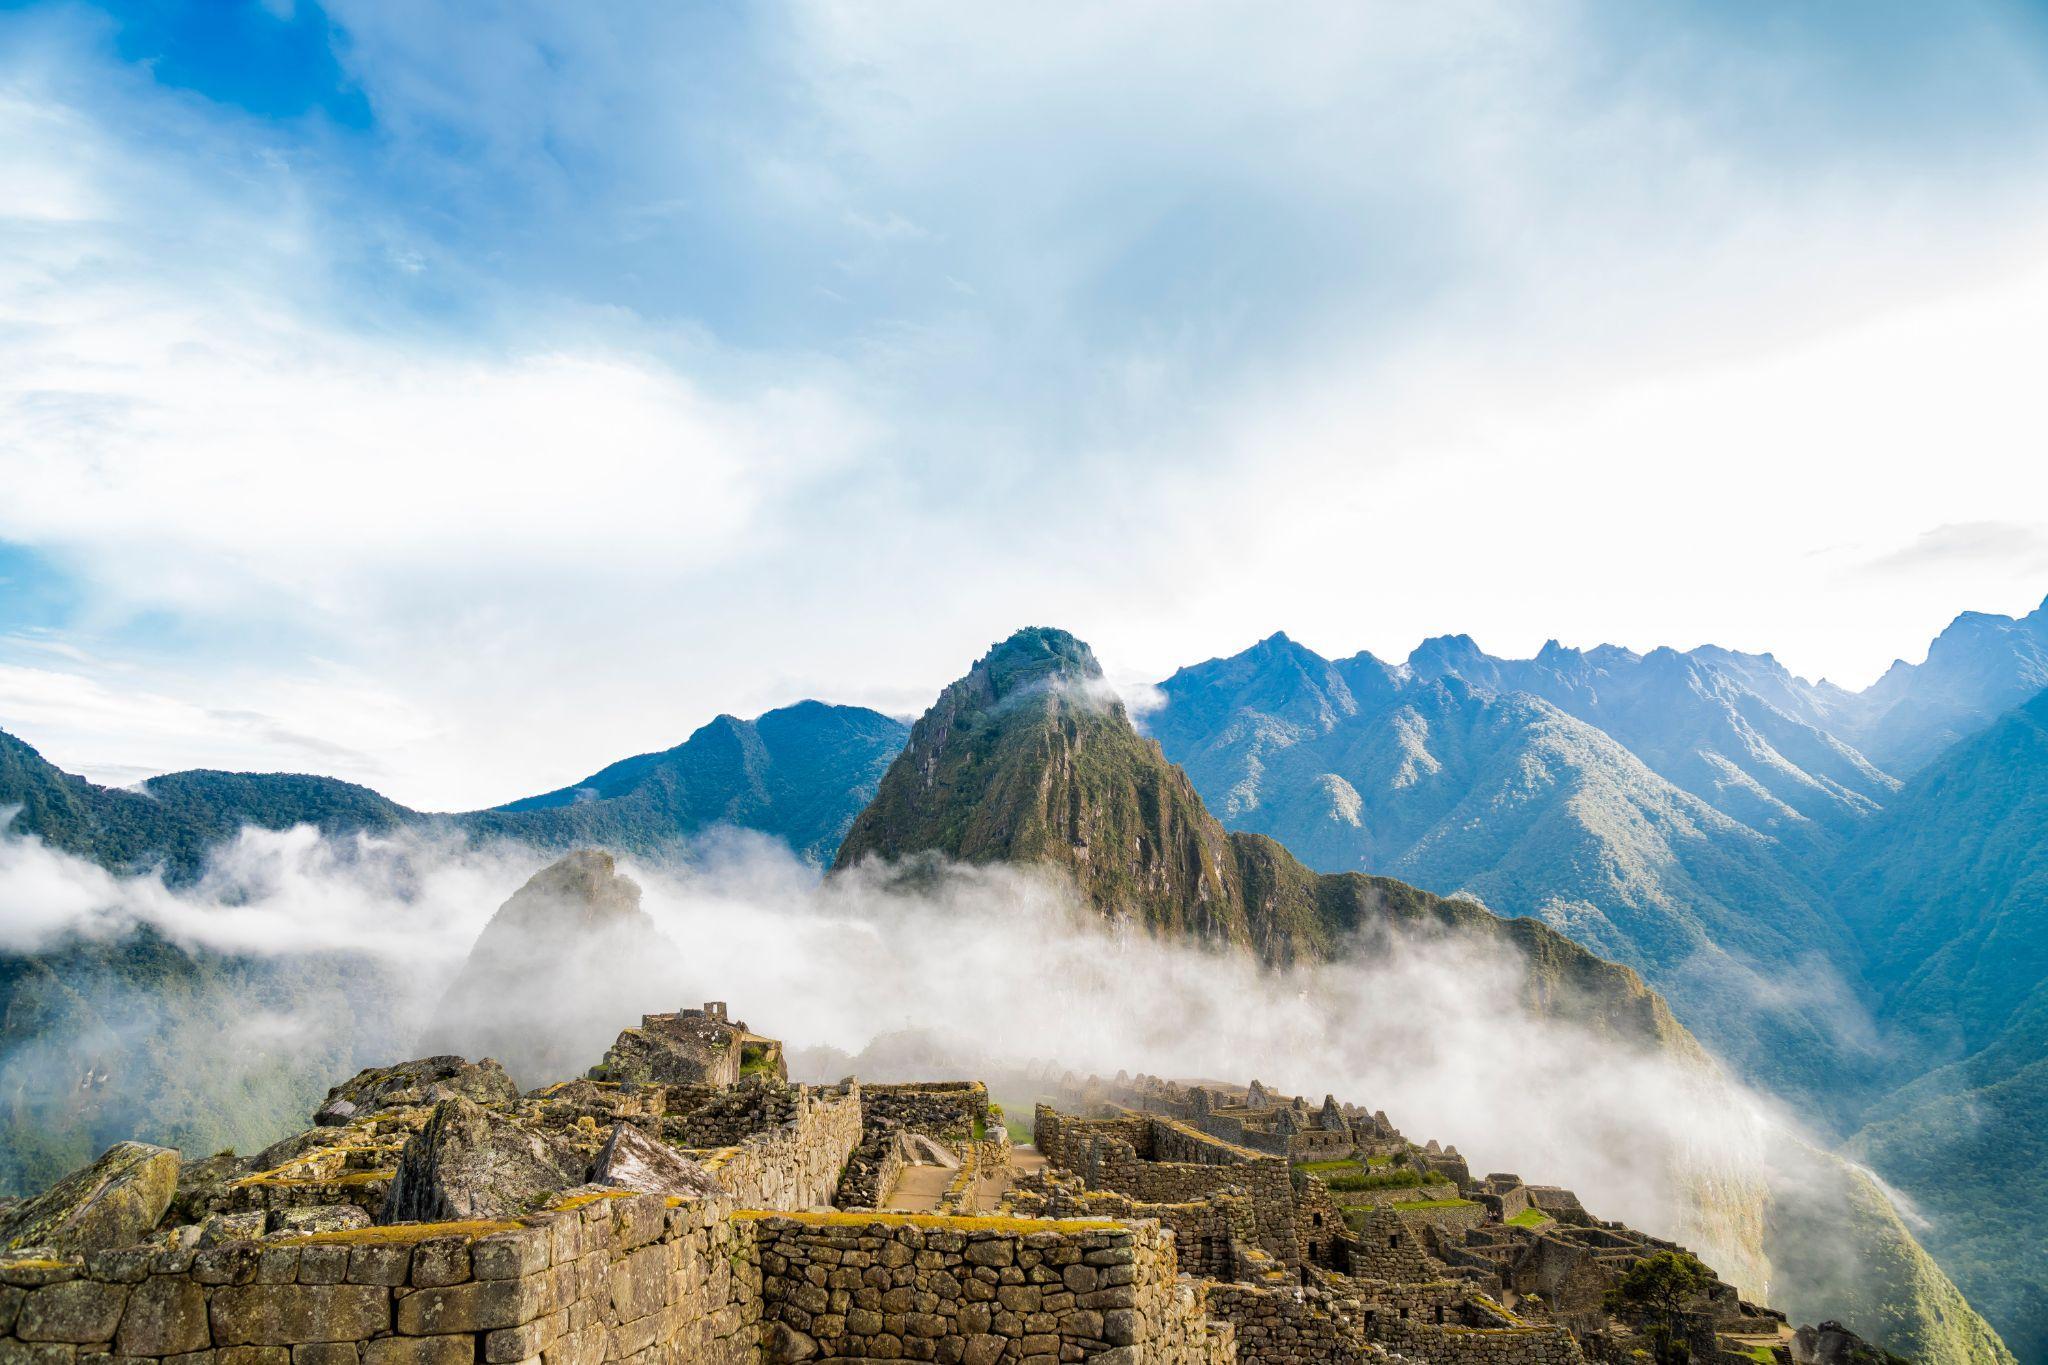 Image of Mach Picchu shrouded in clouds with mountains in the background.